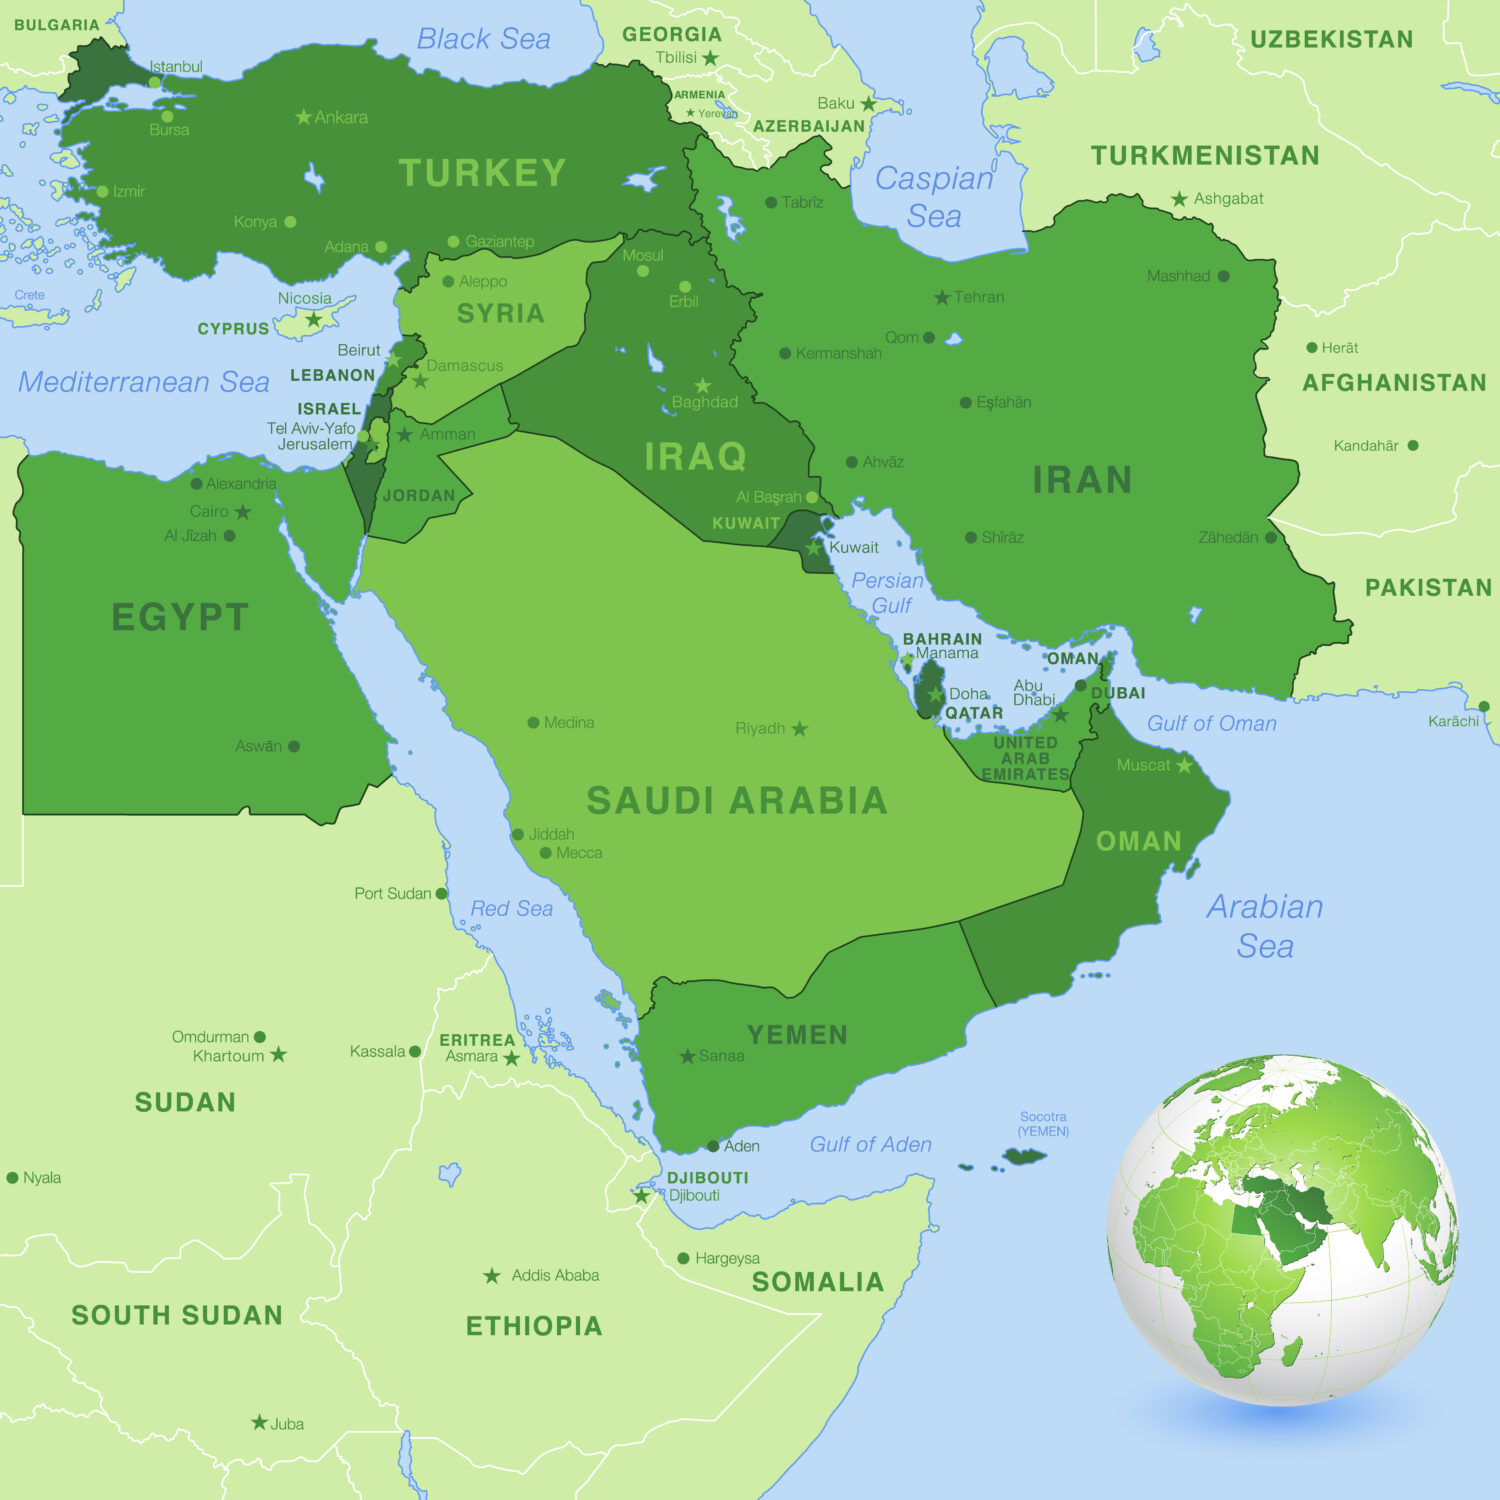 Israel on a map of the Middle East